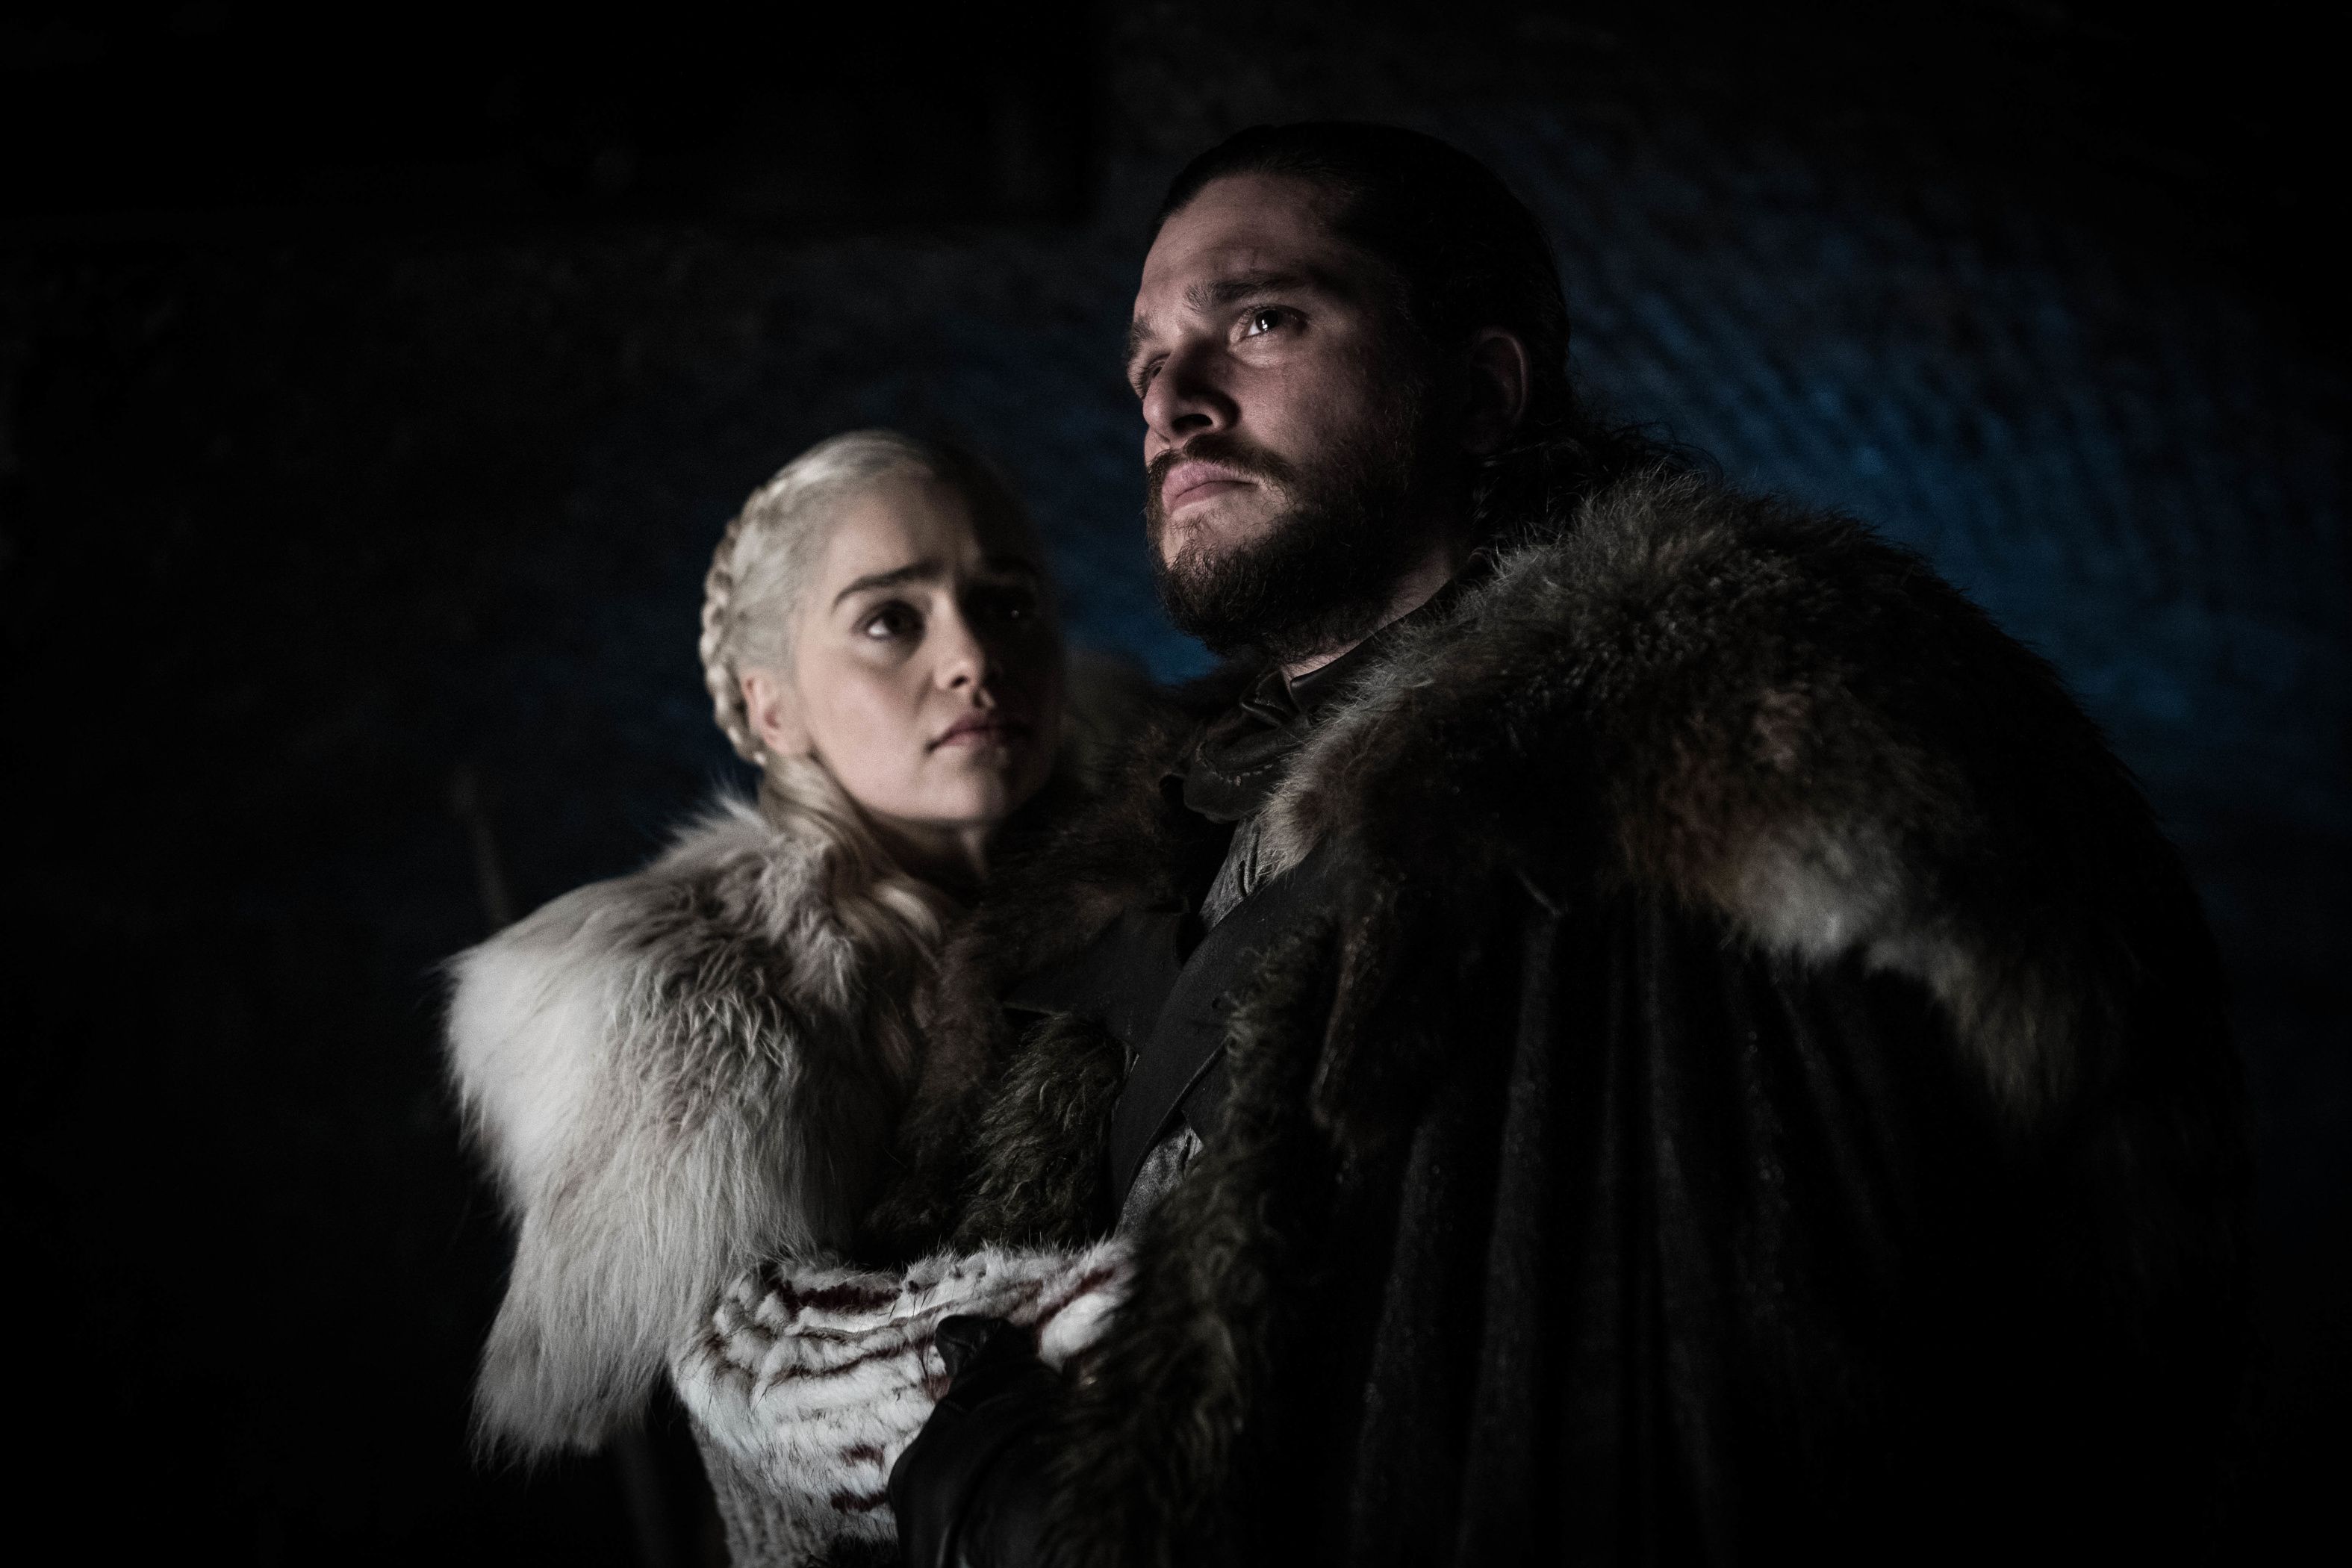 Boy Blackmail Aunty Force Sex - Game of Thrones: Jon and Dany's Incest Is Creepy, Right?